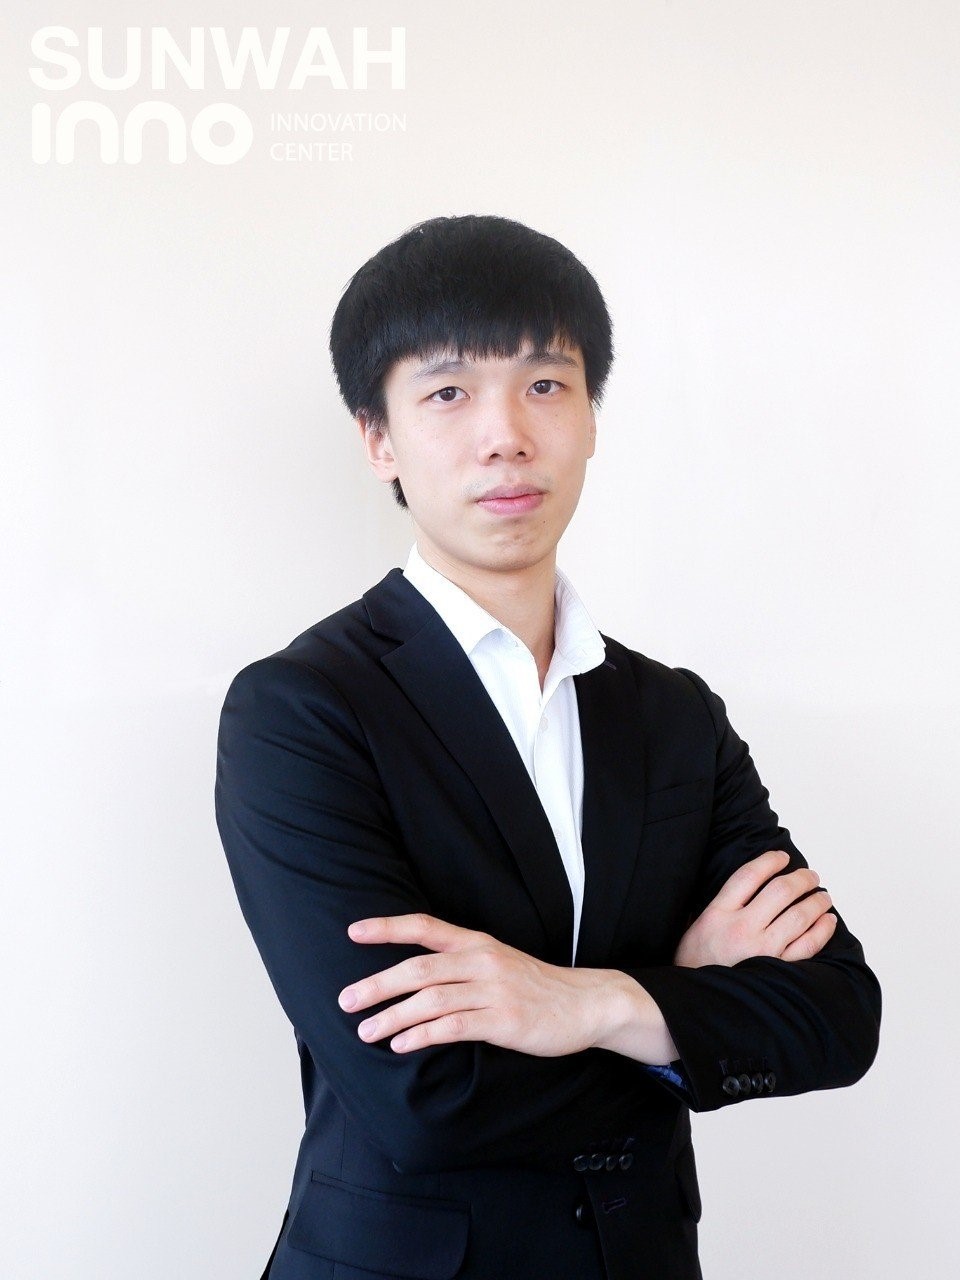 Mr. Jesse Choi is the General Director of Sunwah Group in Southeast Asia and Vietnam.